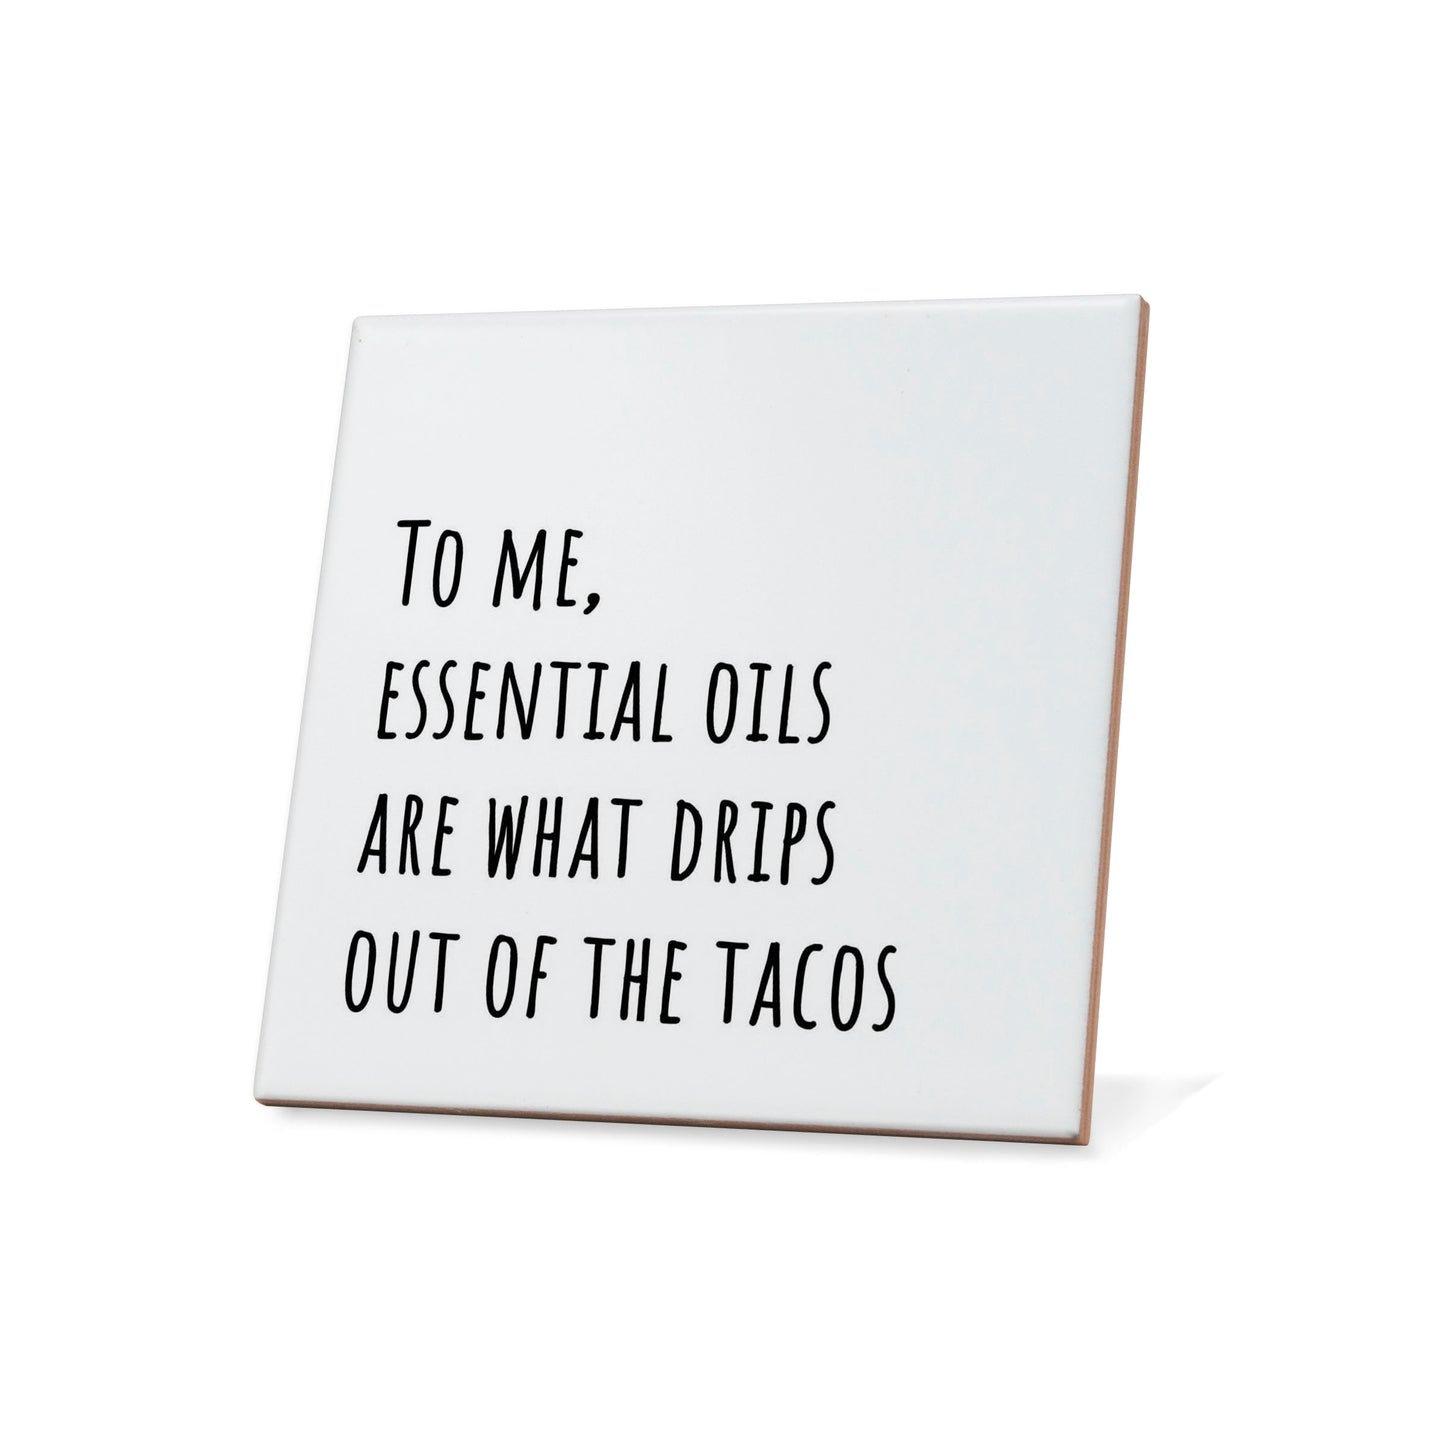 To me, essential oils are what drips out of the tacos Quote Coaster